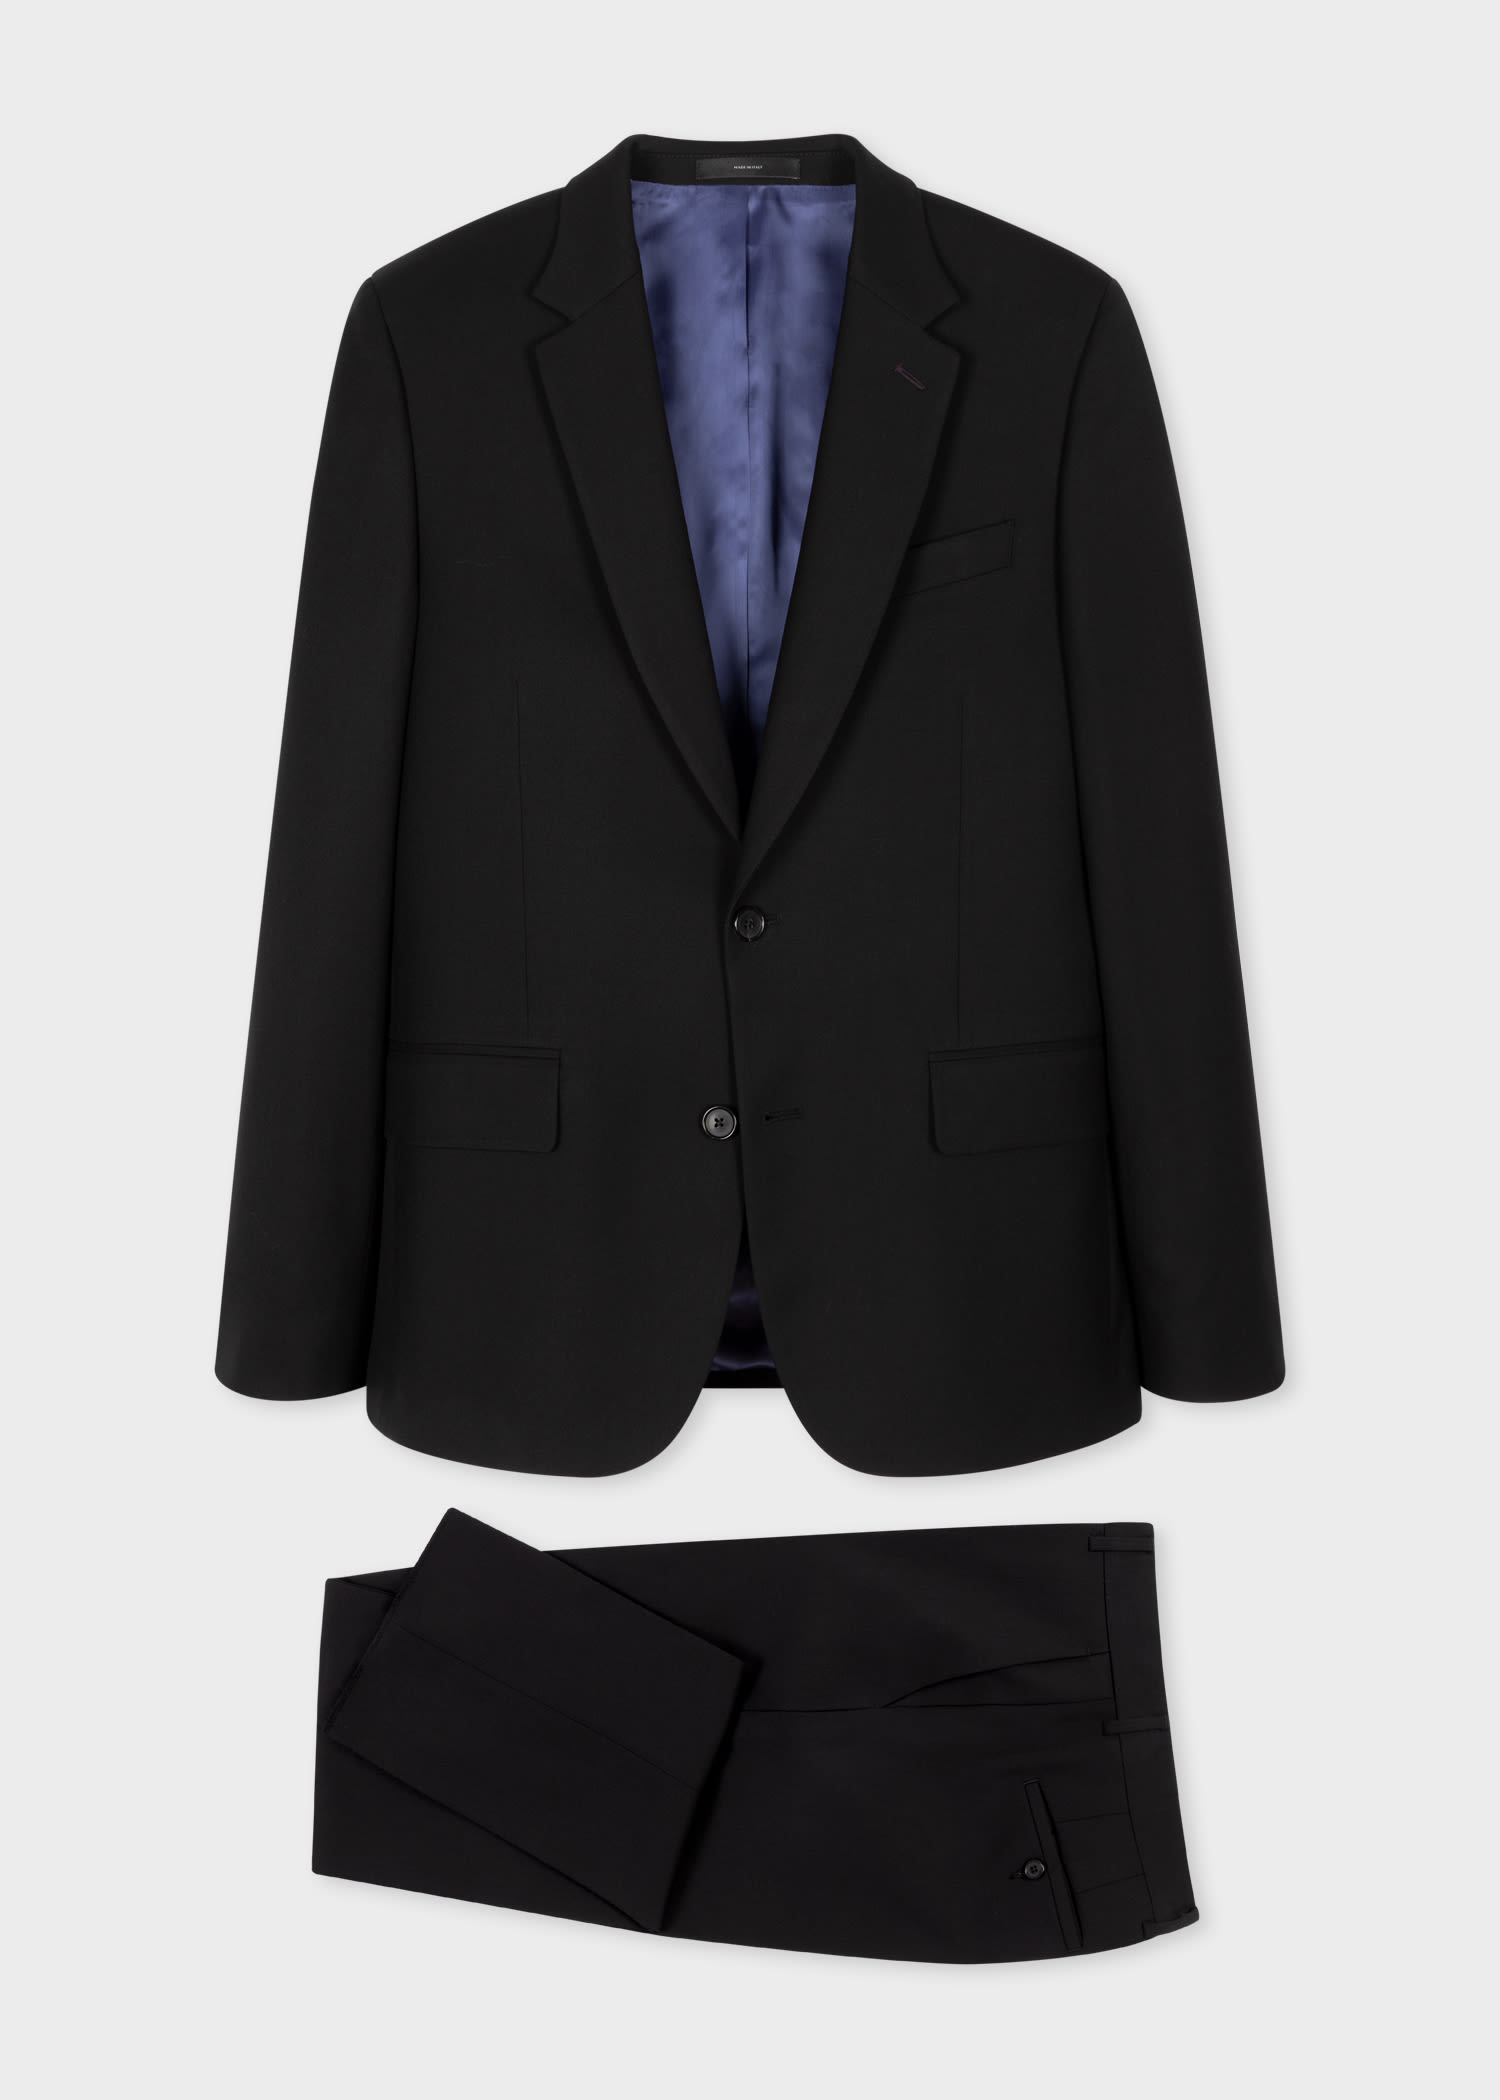 The Soho - Tailored-Fit Black Wool 